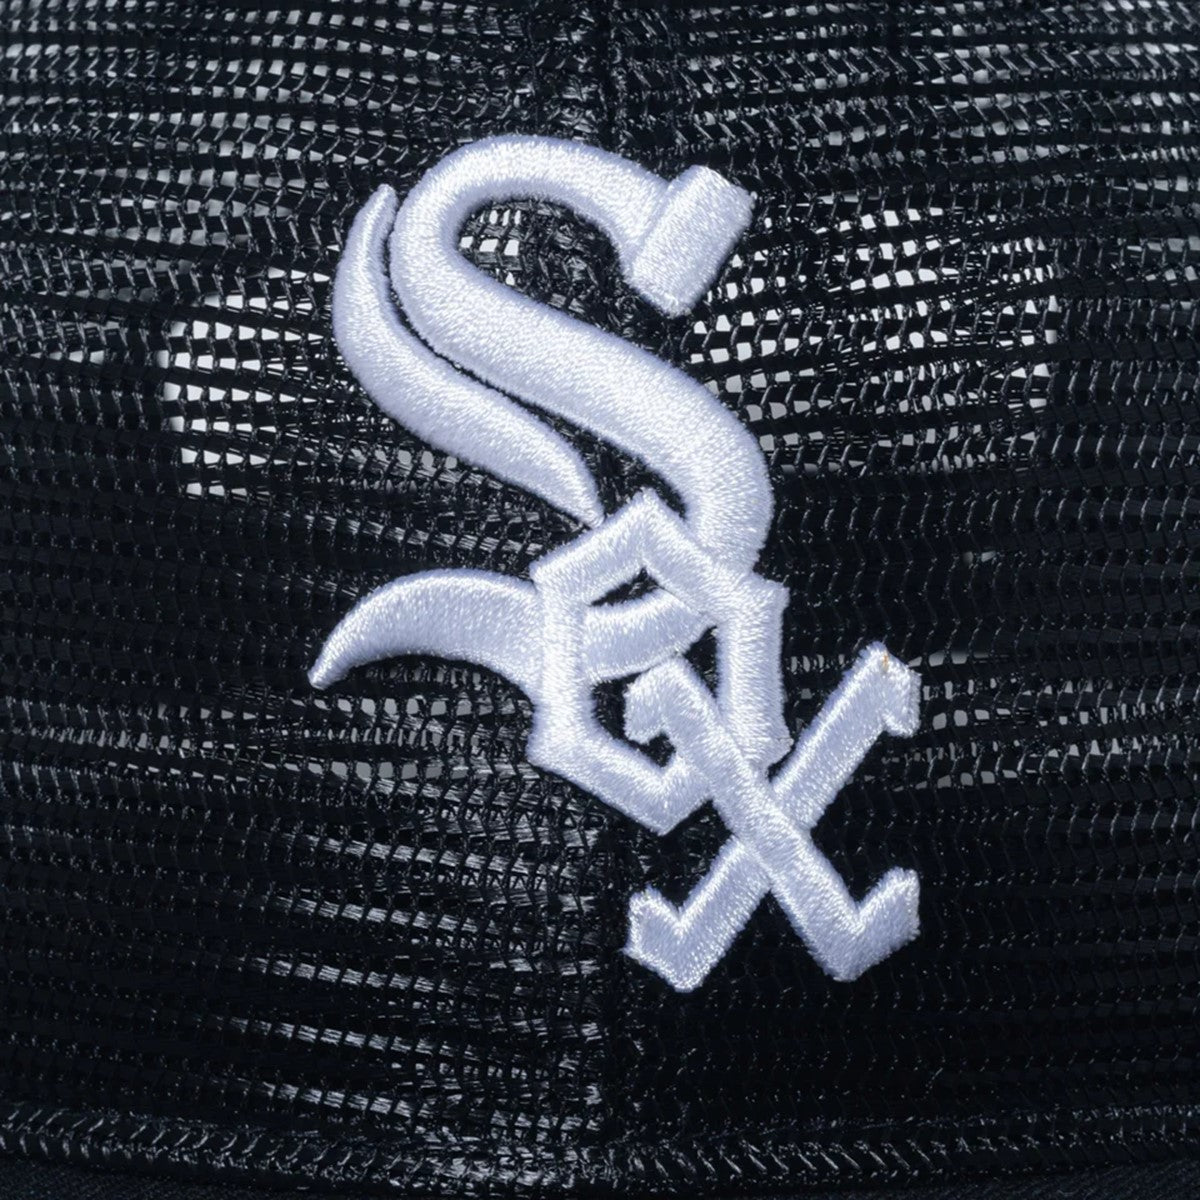 NEW ERA Chicago White Sox - 9FIFTY ALL MESH SP BLK【14109656】